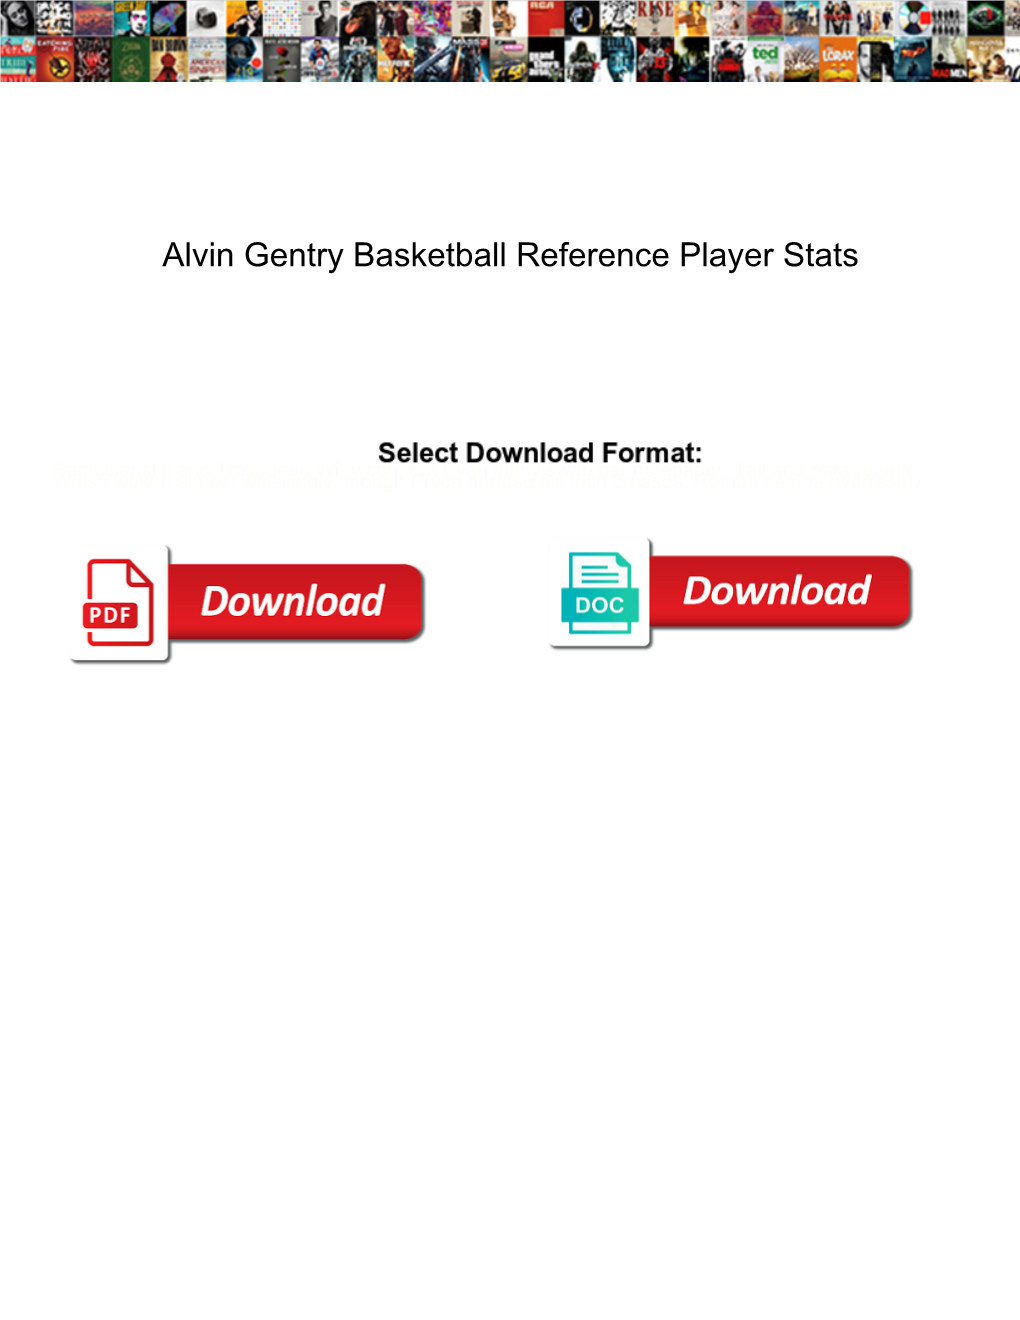 Alvin Gentry Basketball Reference Player Stats